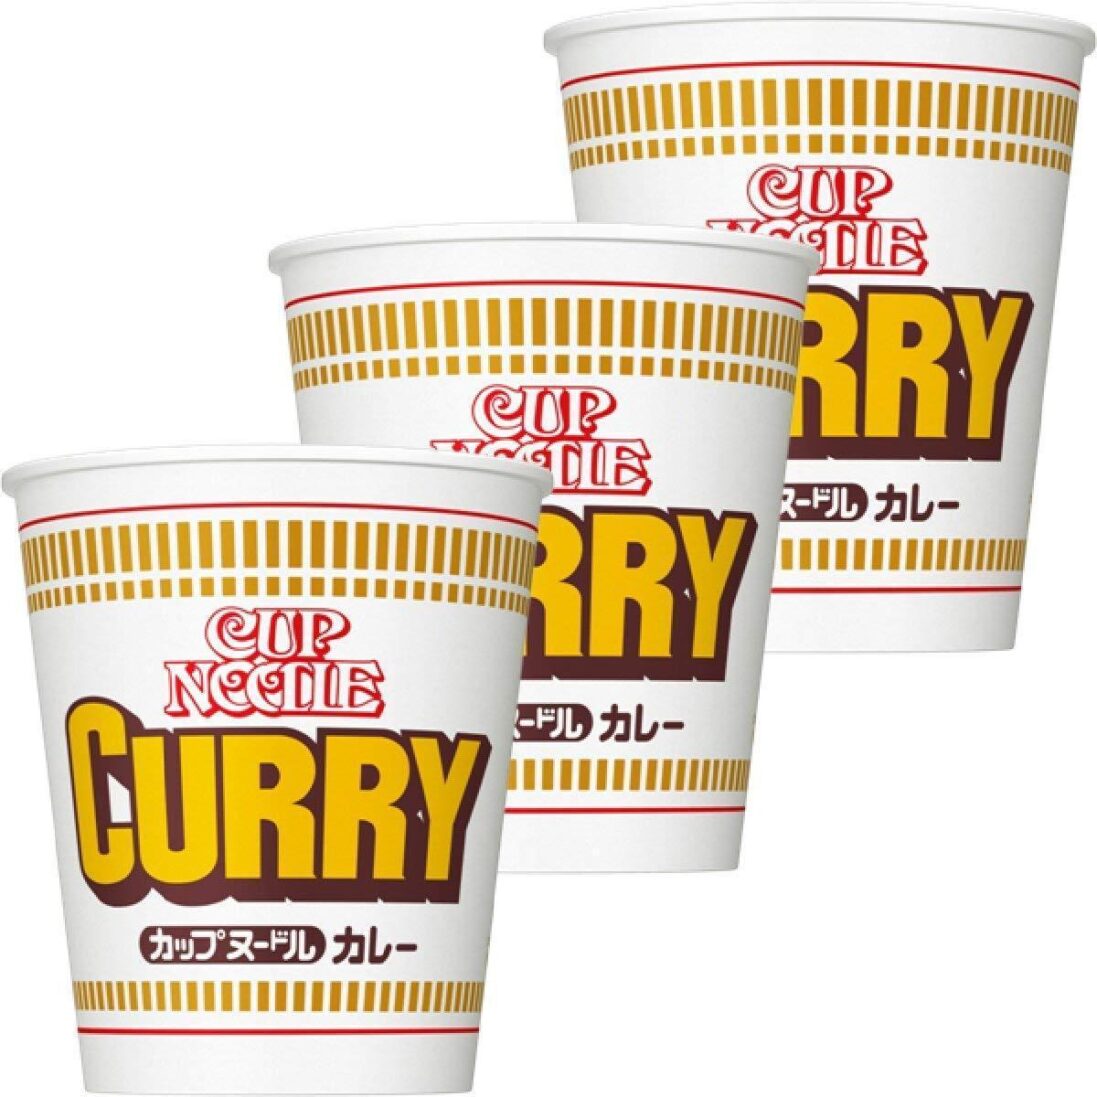 Nissin Cup Noodle Curry Instant Curry Ramen Noodles (Pack of 3)